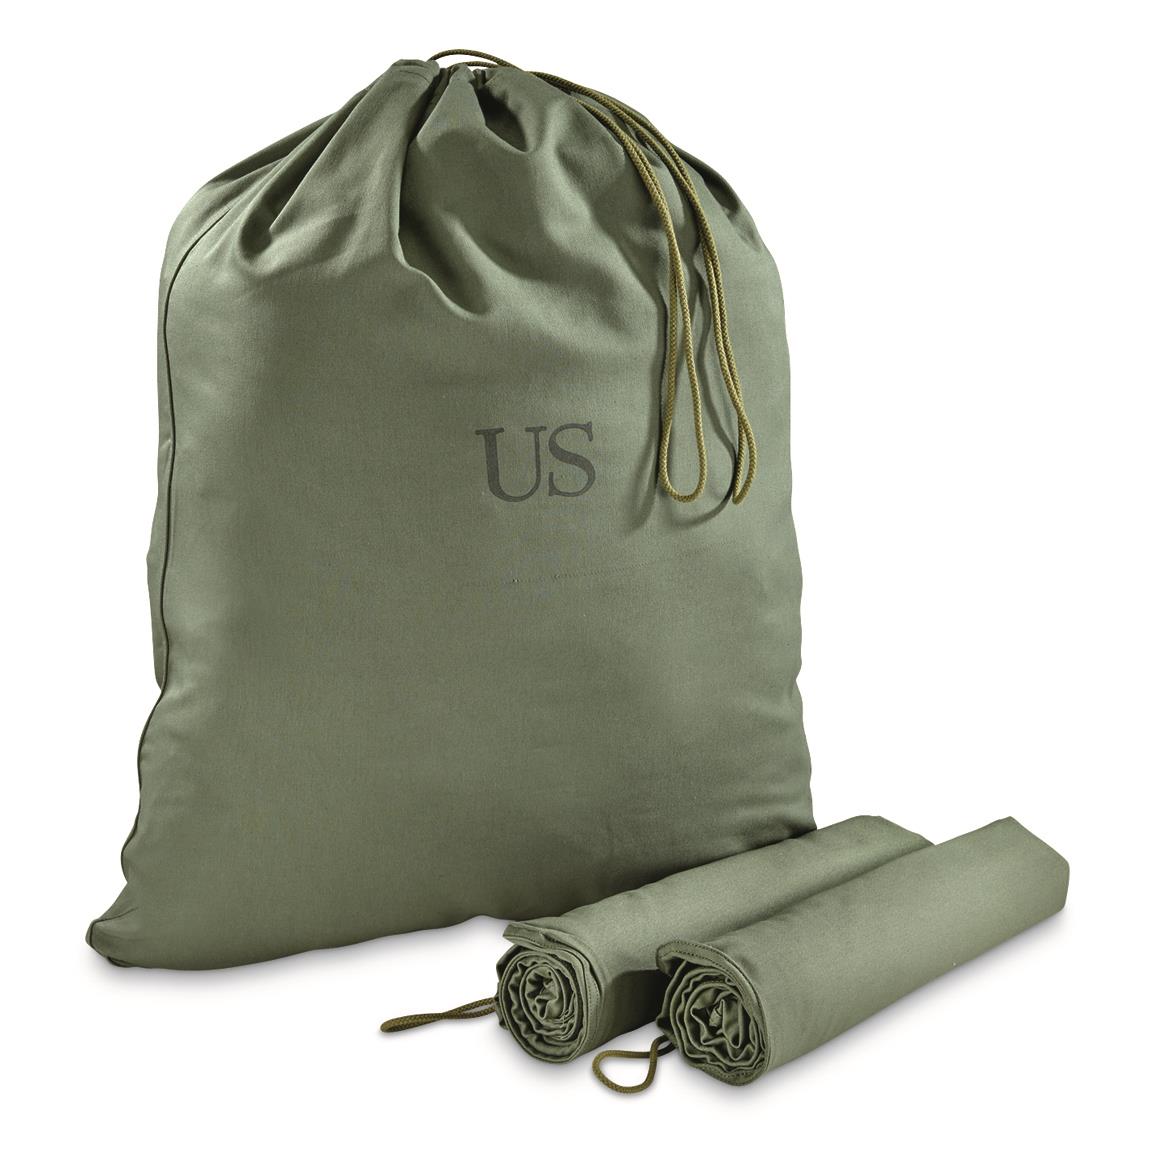 US Military BARRACKS BAG OD Green 100% Cotton Large Laundry Bag Army Issue ACC 